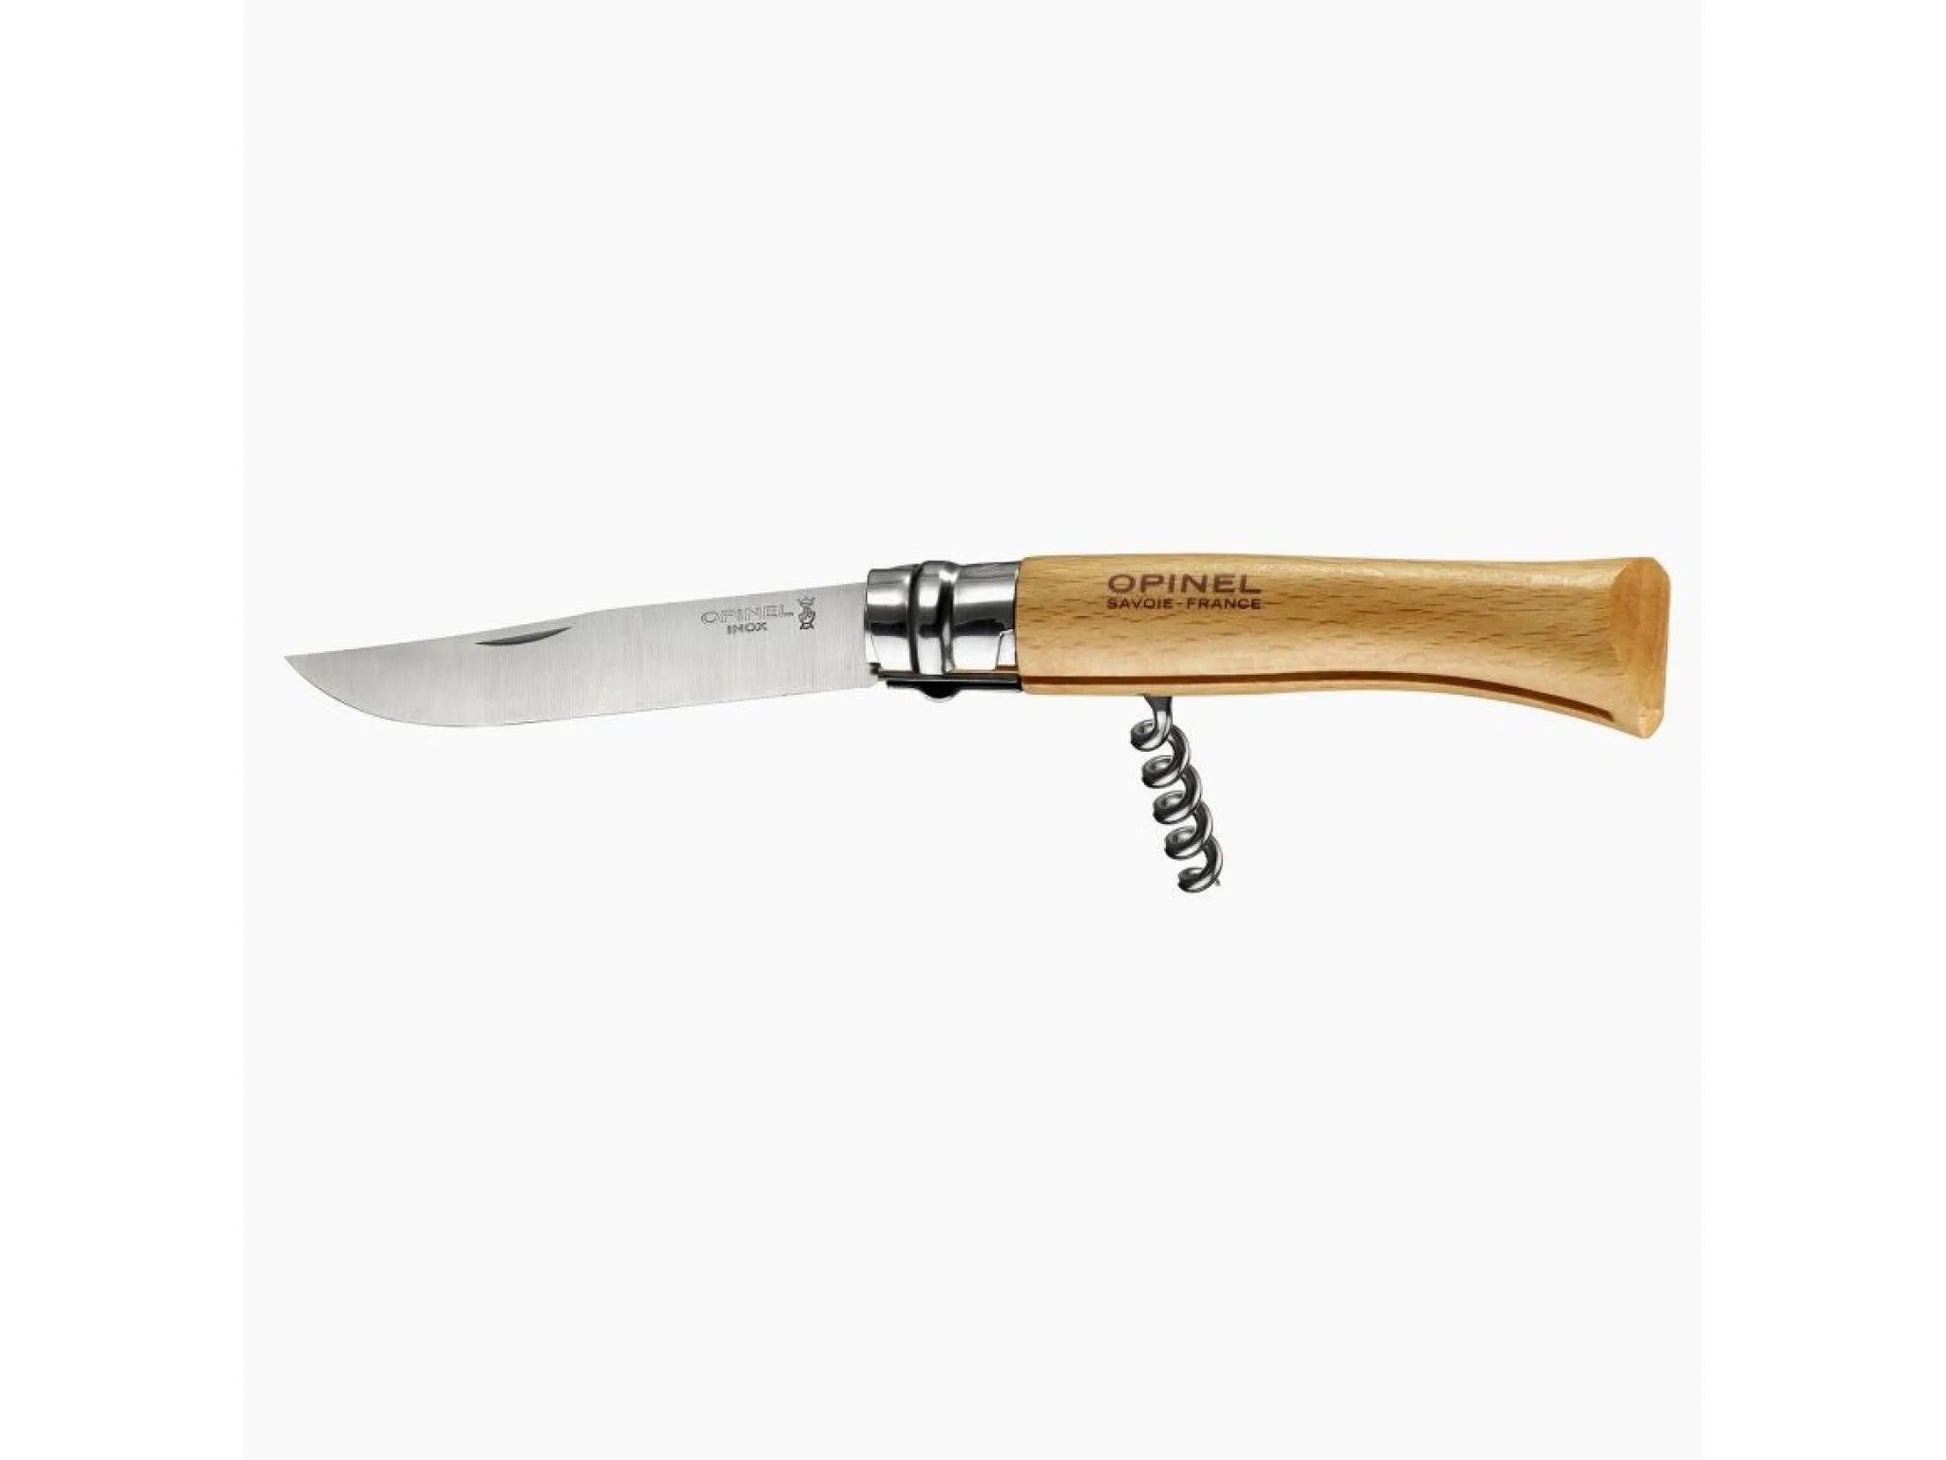 Couteau N10 - Inox - Hêtre - Opinel - Tire-bouchon